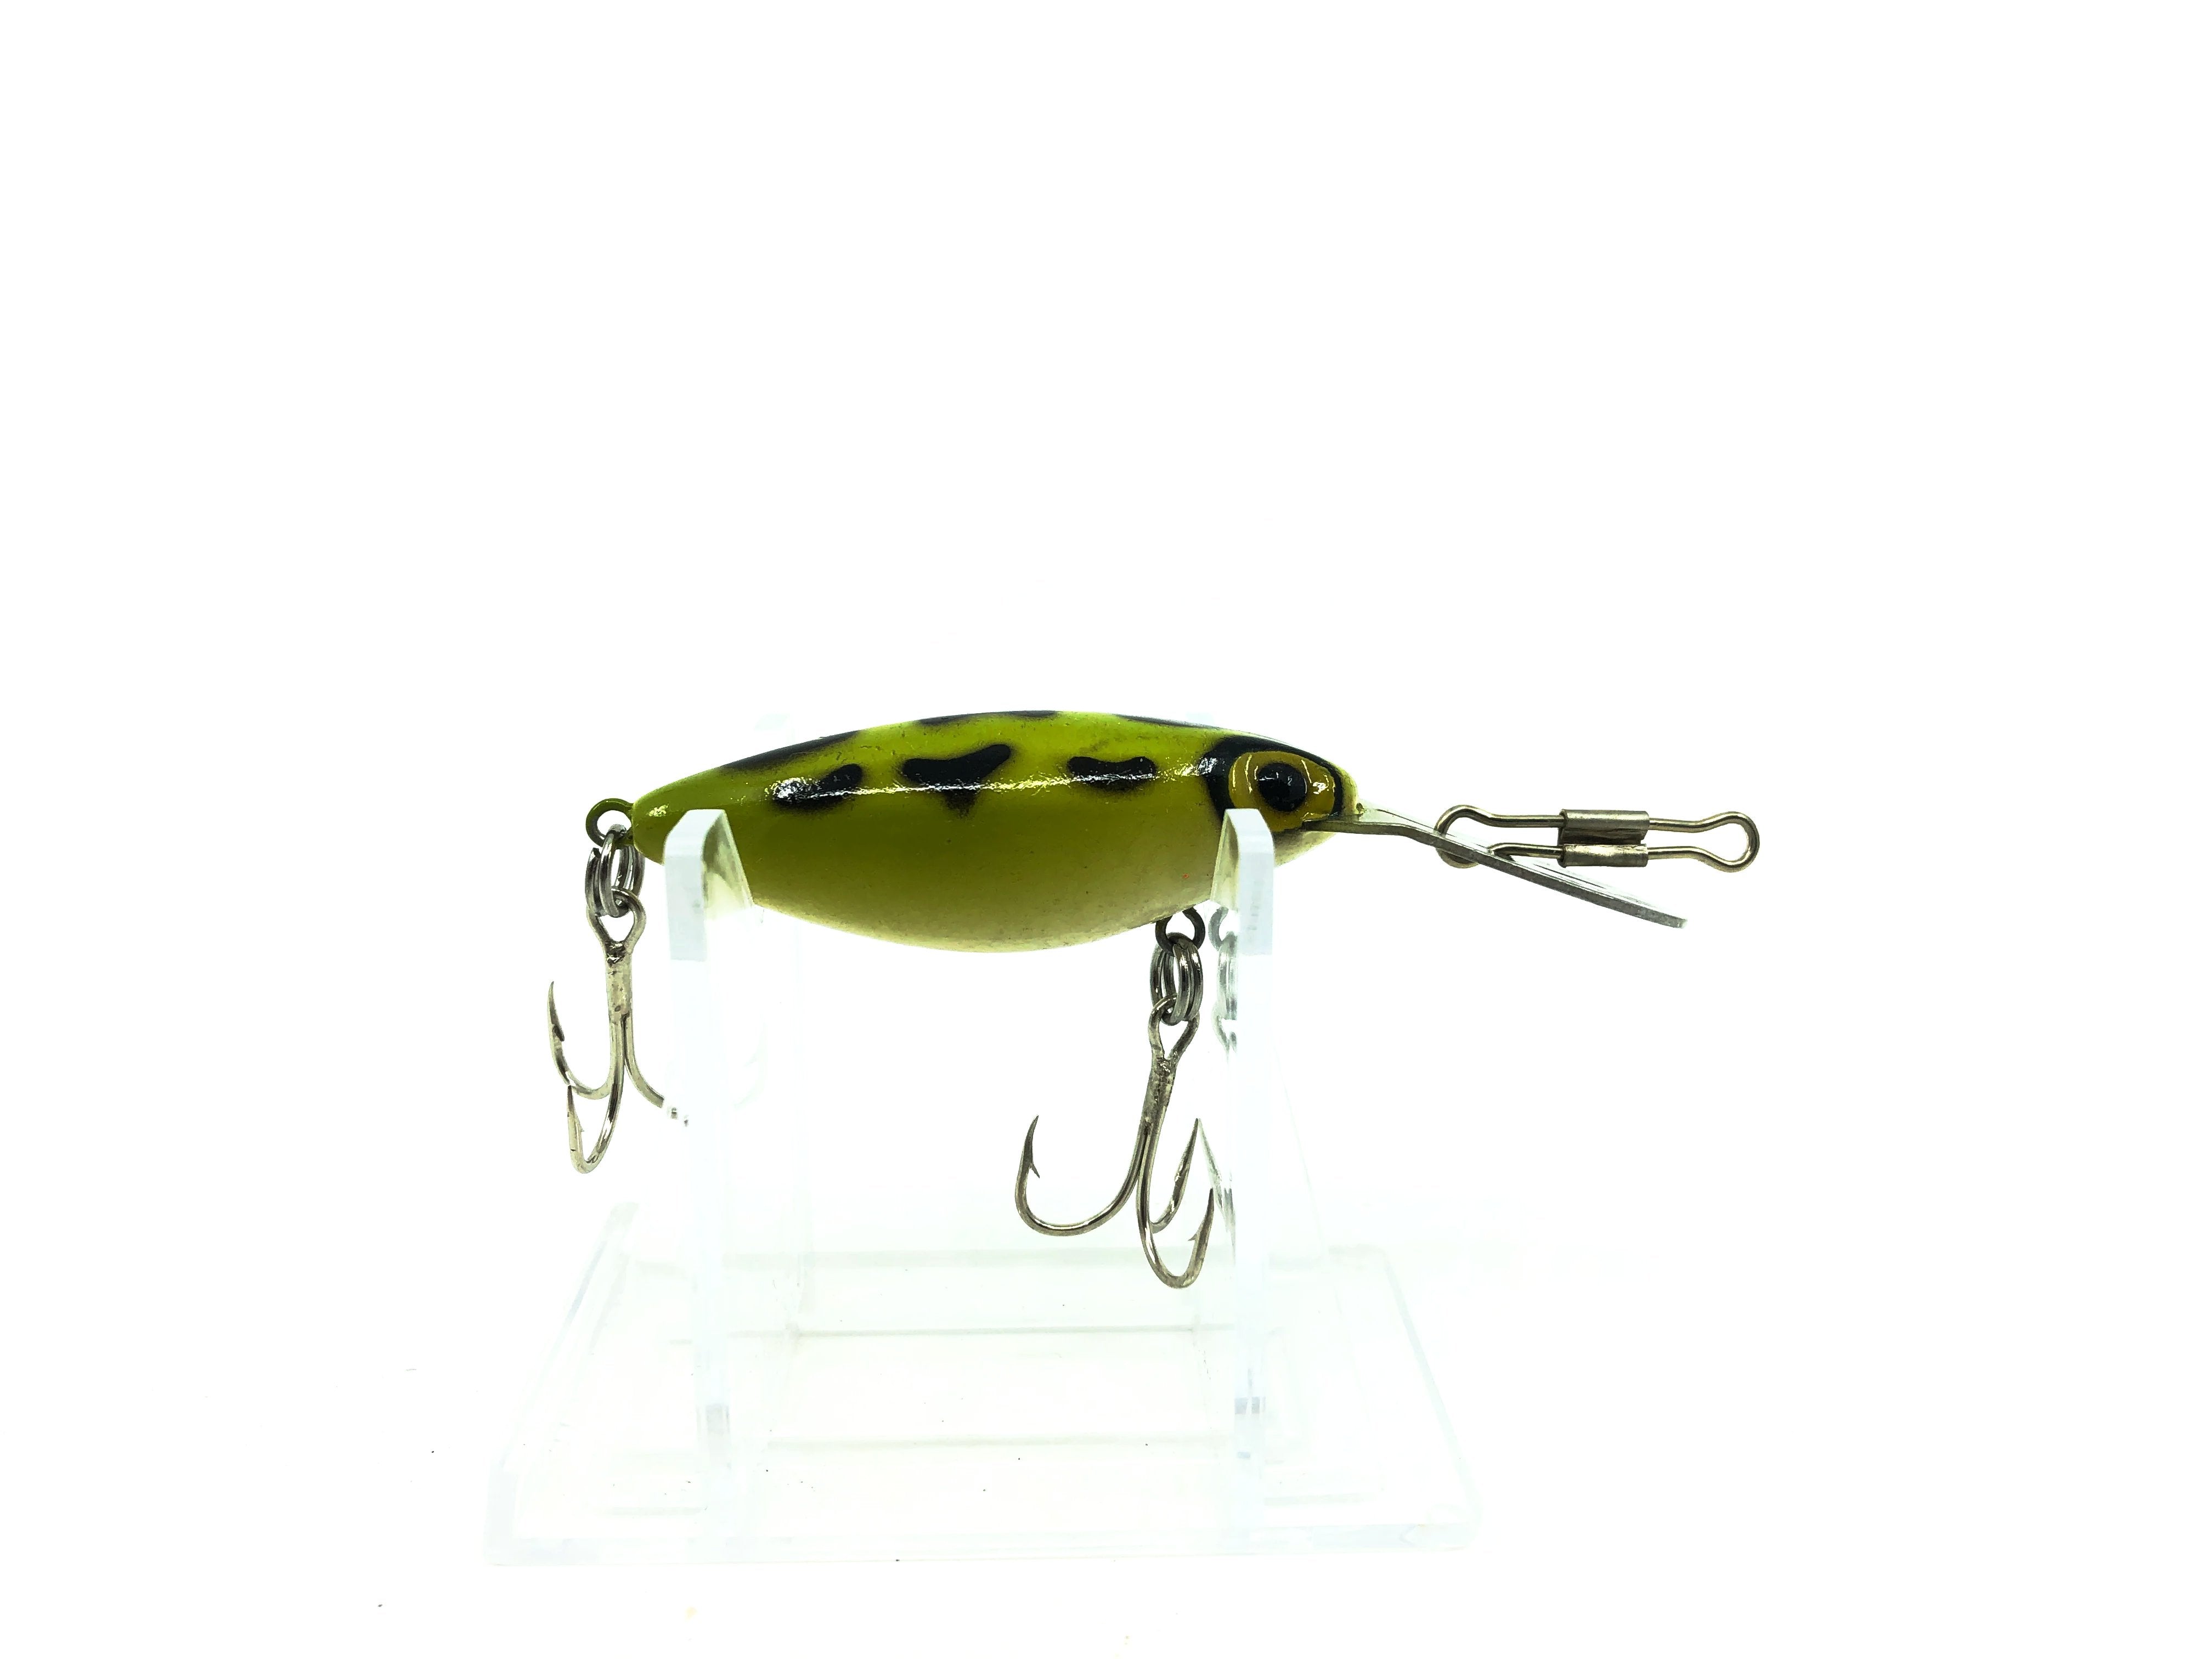 Storm Thin Fin Hot 'N Tot, H Series, H23 Frog Color – My Bait Shop, LLC